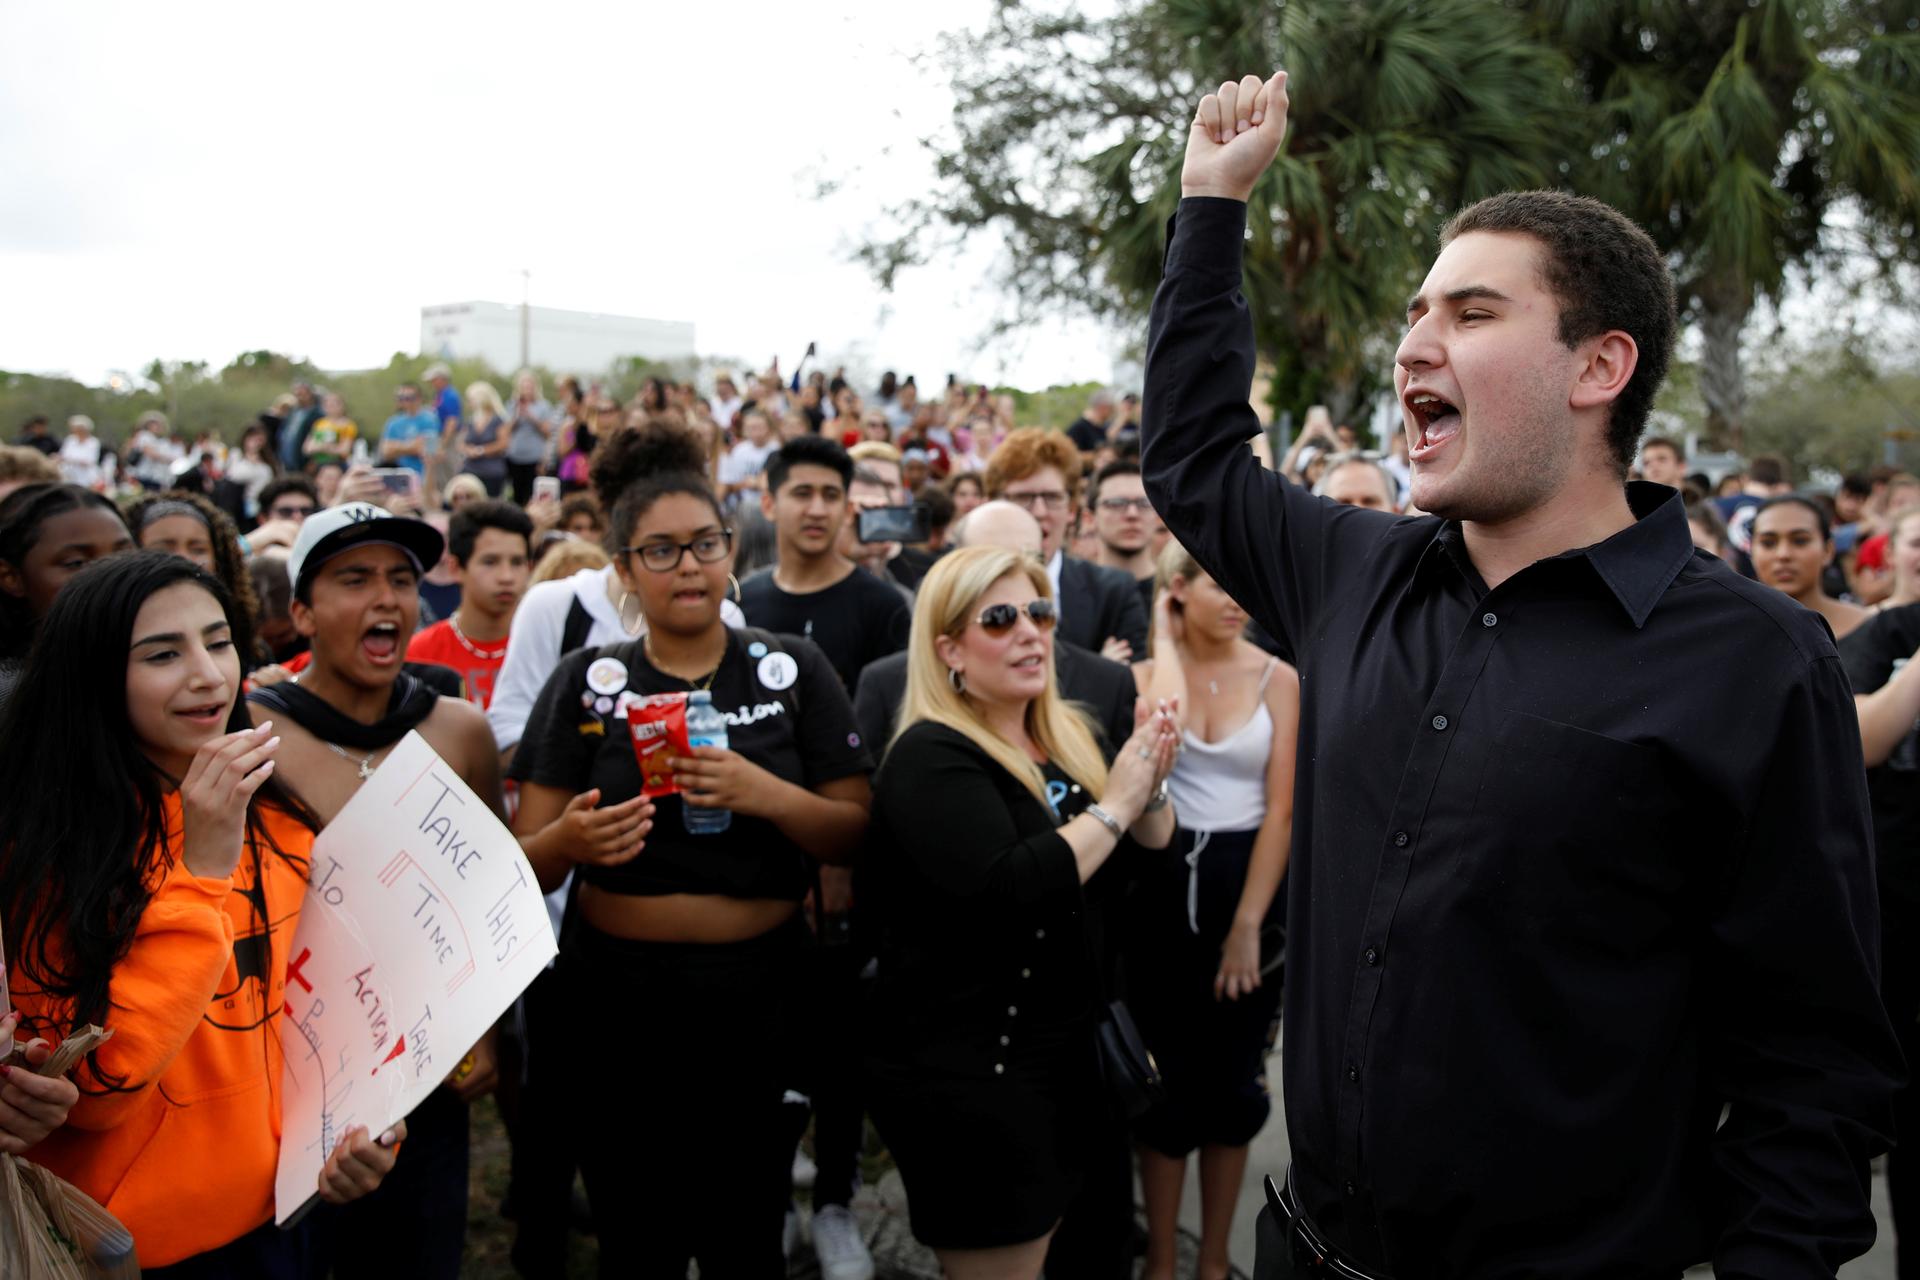 Student speaks to crowd at a protest